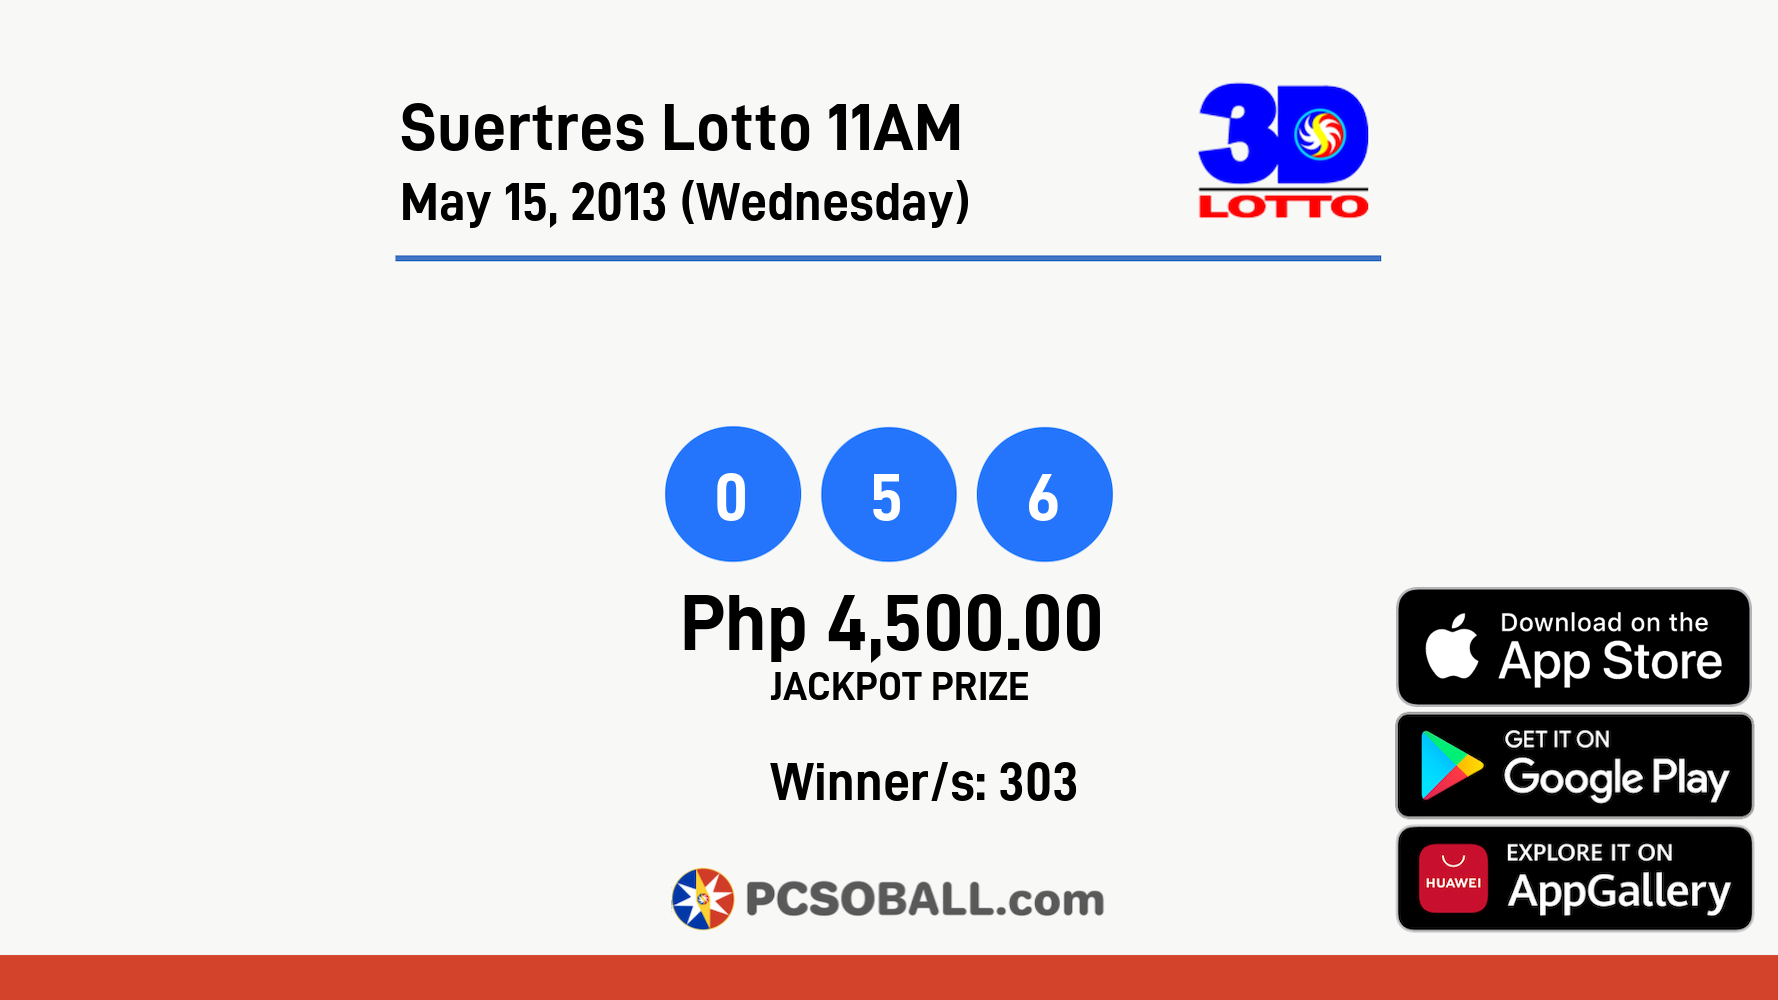 Suertres Lotto 11AM May 15, 2013 (Wednesday) Result